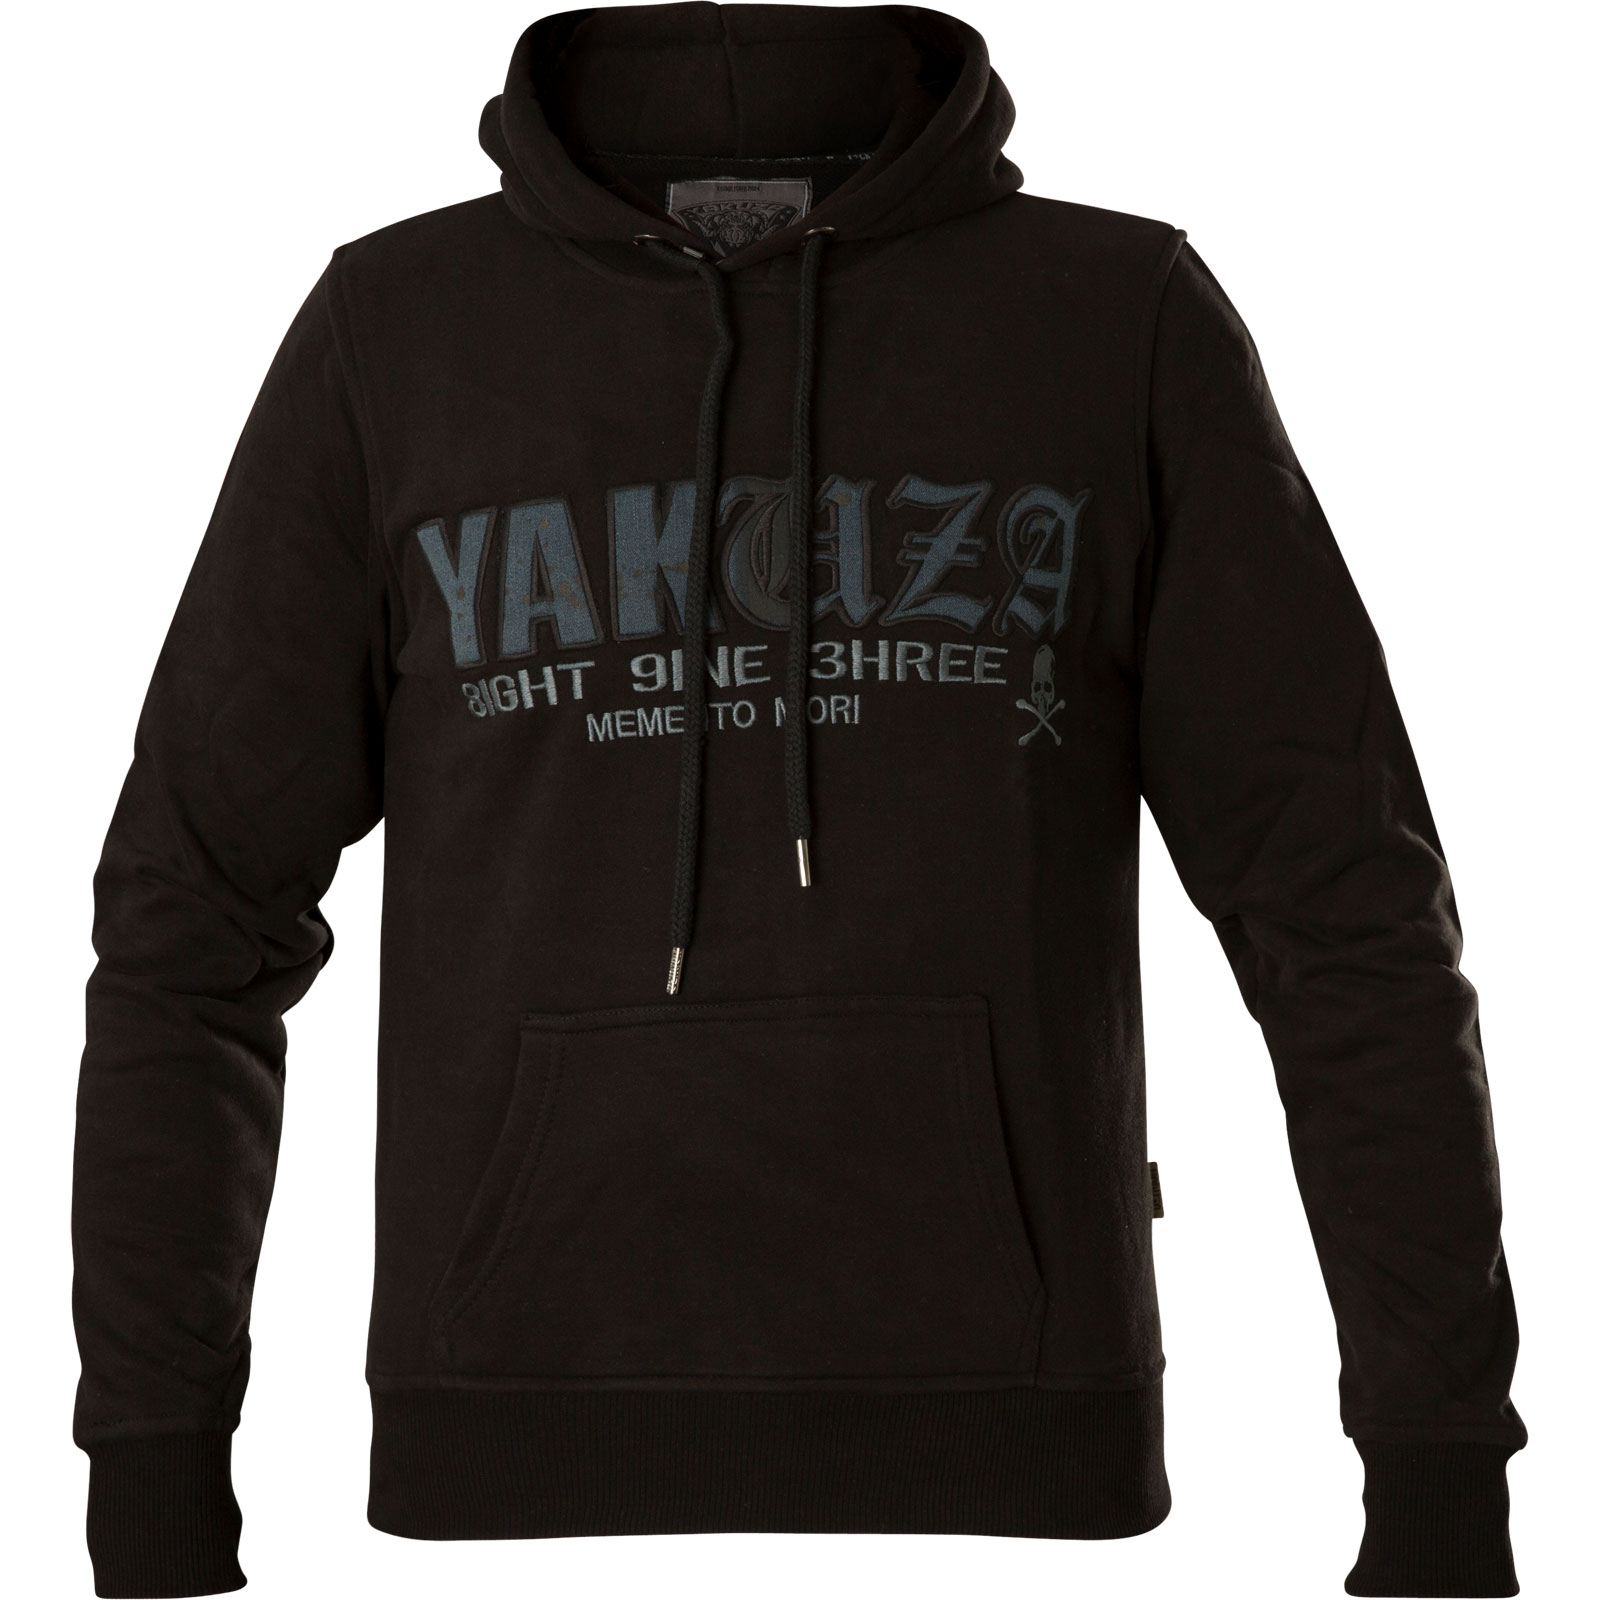 Yakuza Denim Logo Hoodie HOB-13053 with patches and lettering